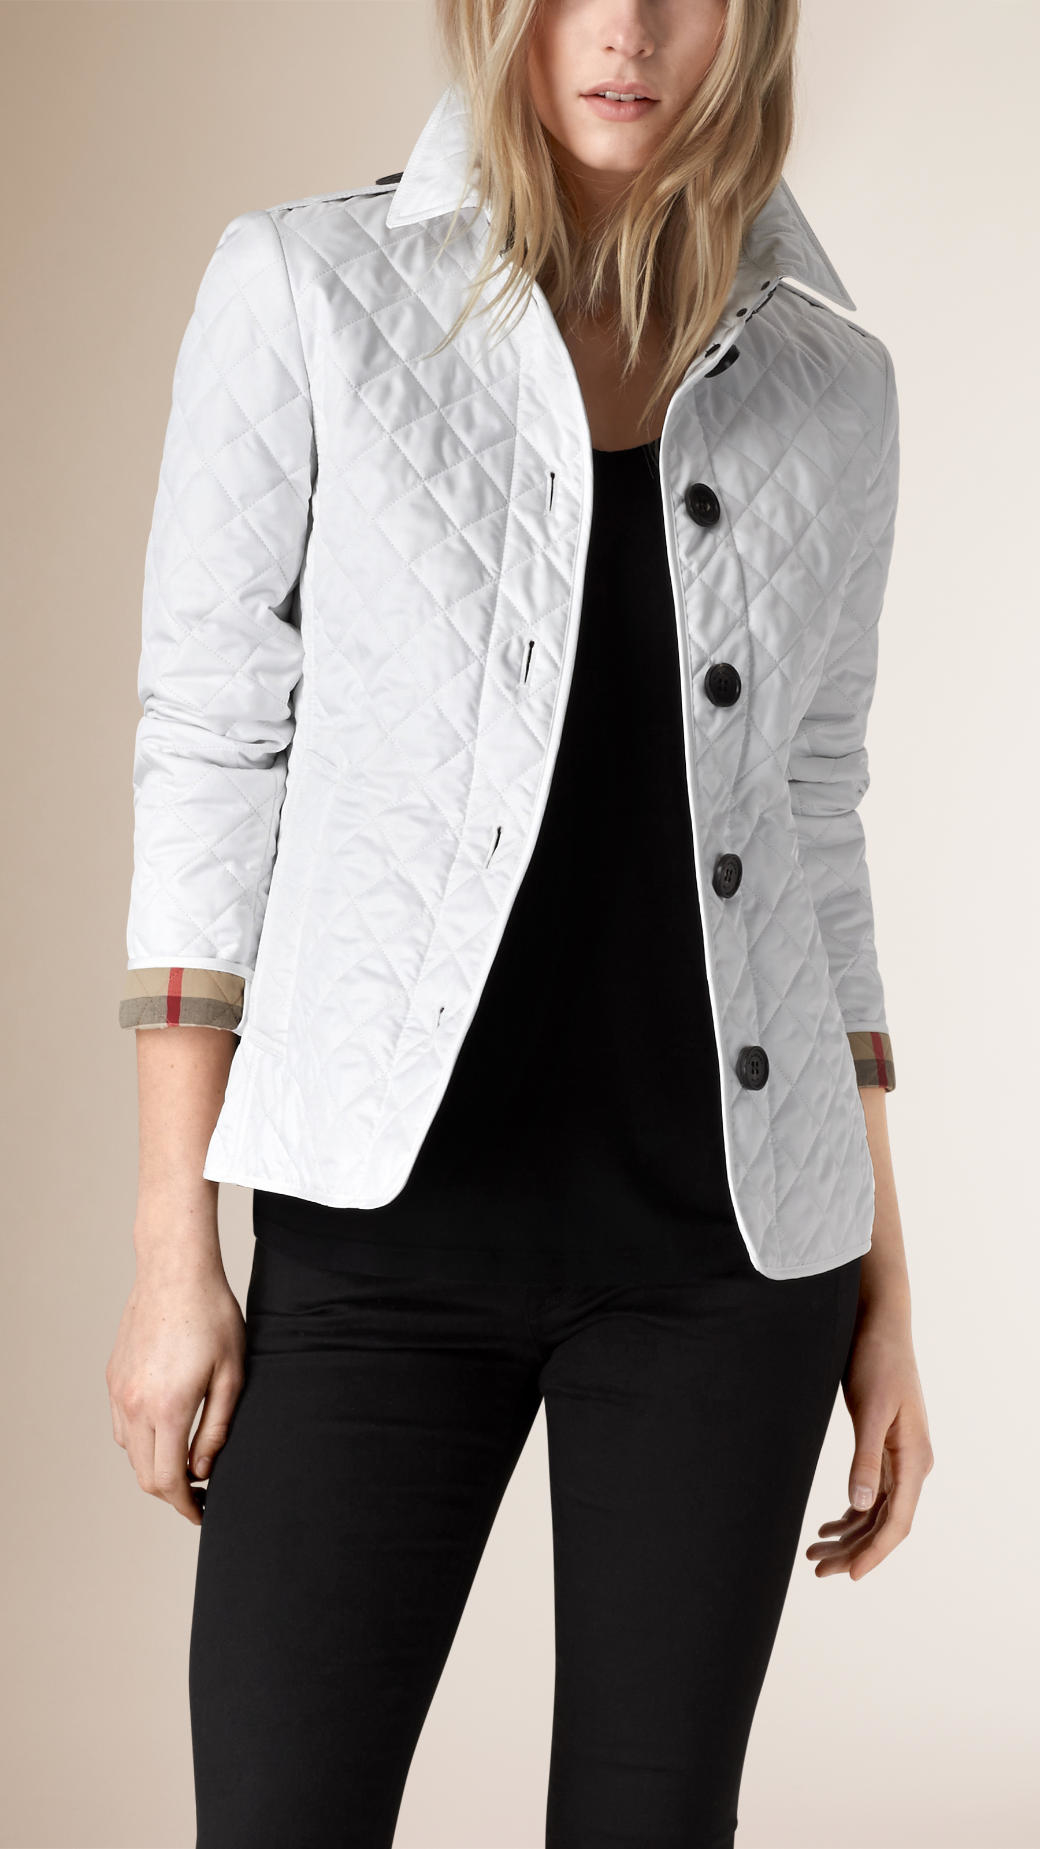 Burberry Synthetic Diamond-Quilted Jacket in Chalk (White) - Lyst